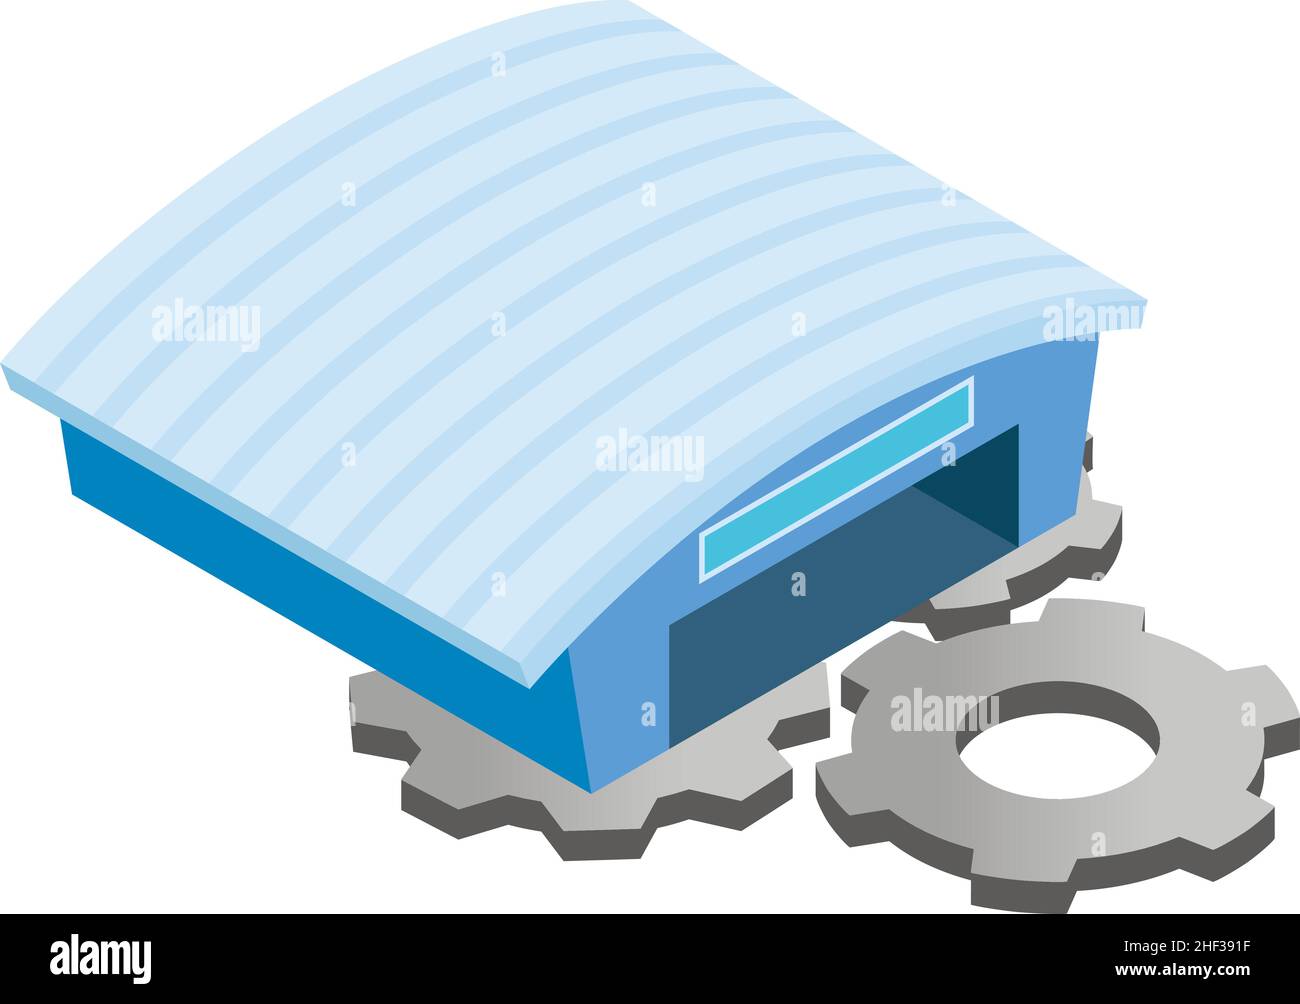 Maintenance concept icon isometric vector. Gear and hangar building icon. Technical support, repair, service icon Stock Vector